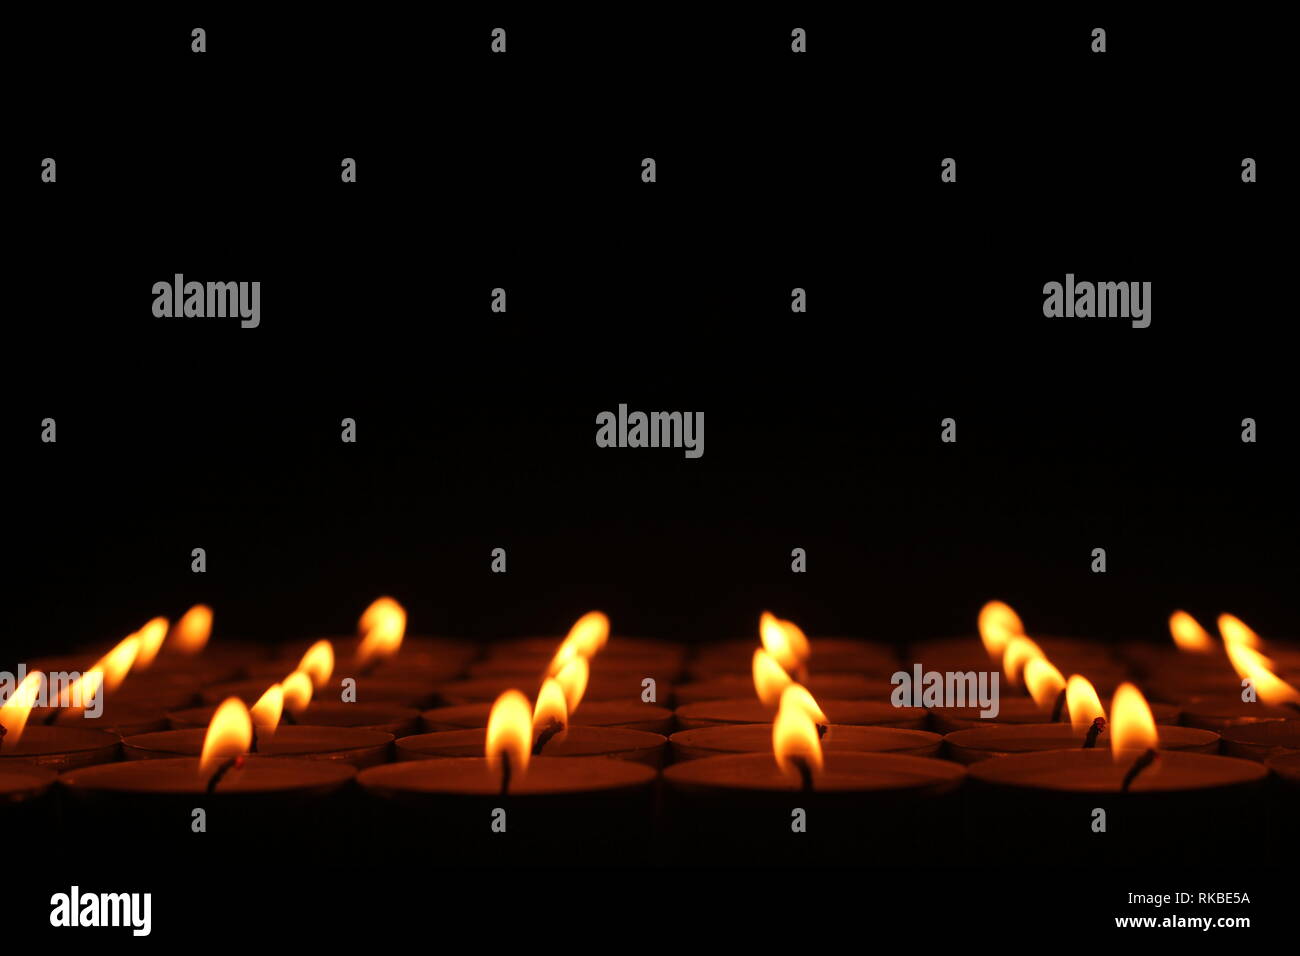 A royalty free image of rows of candles that seem to go one forever, with a black top portion. Stock Photo